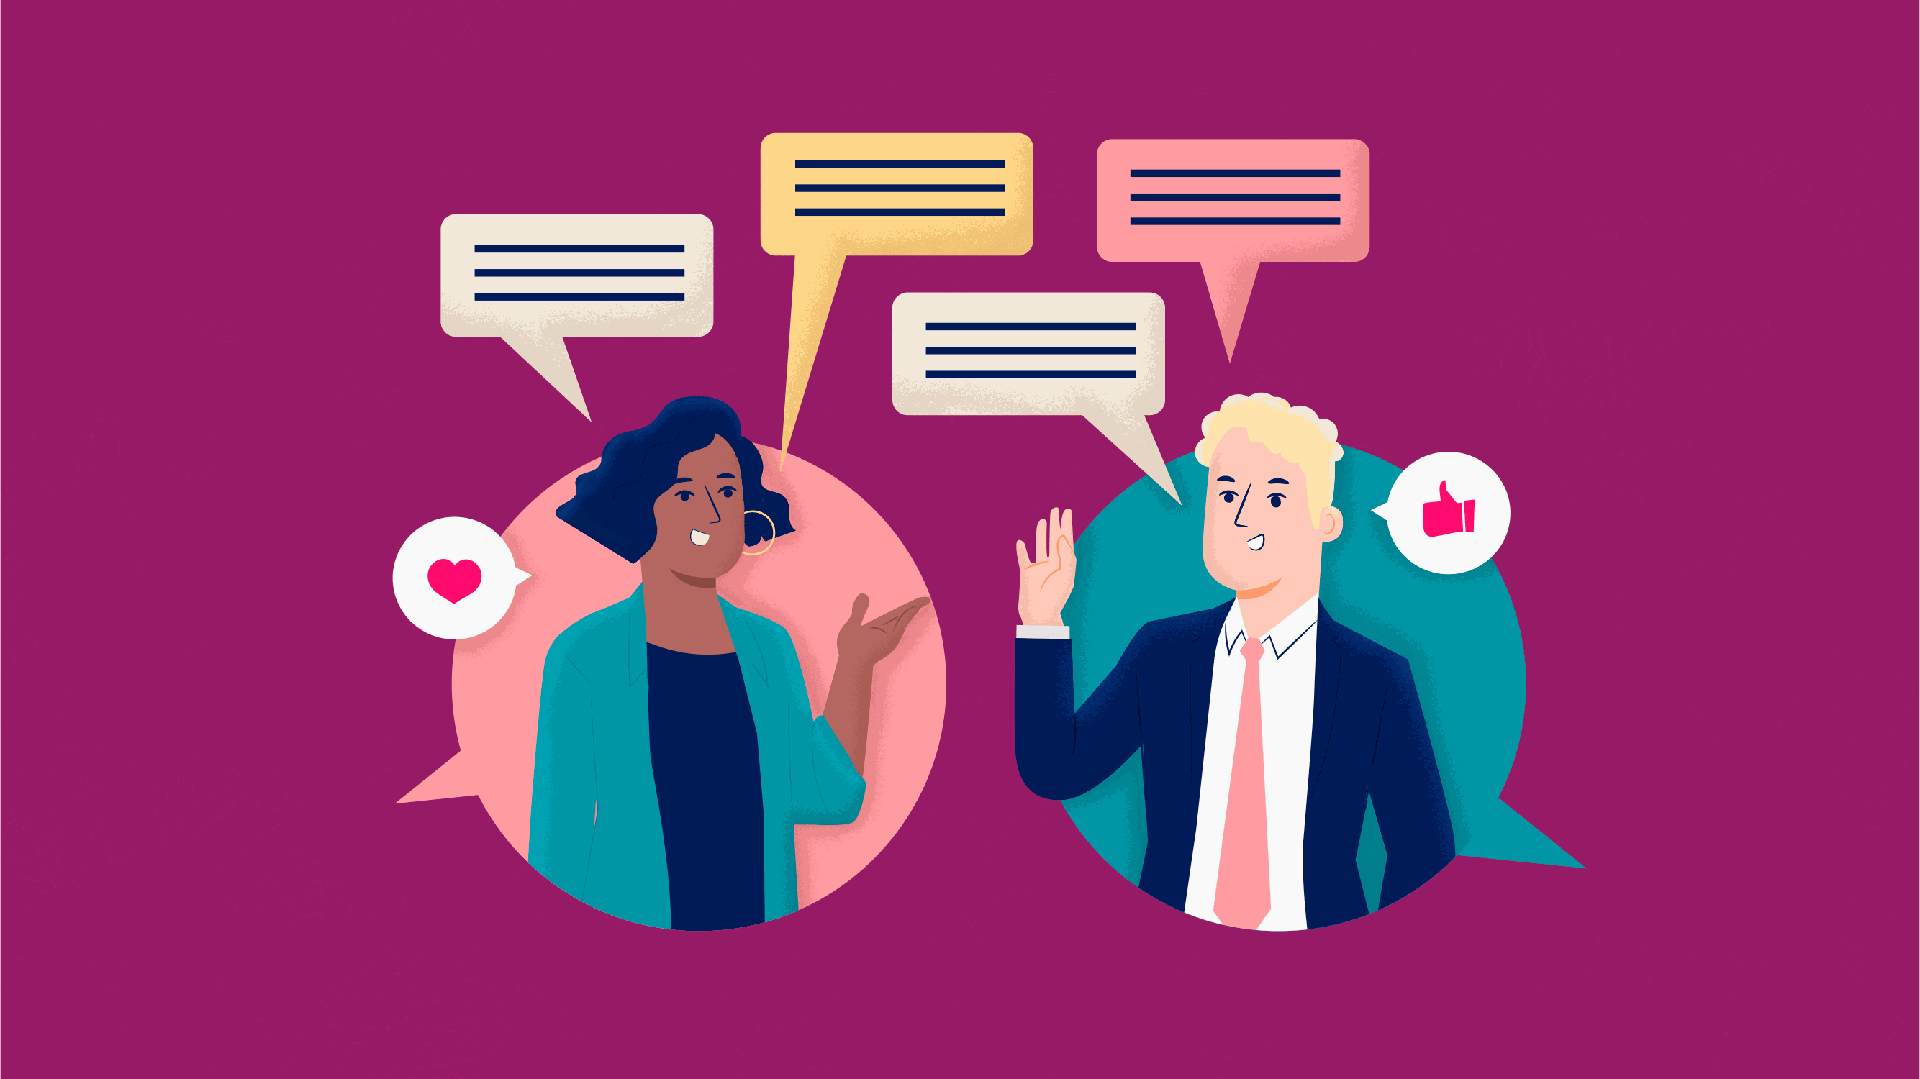 Illustration of two professionals having a conversation with text bubbles surrounding them